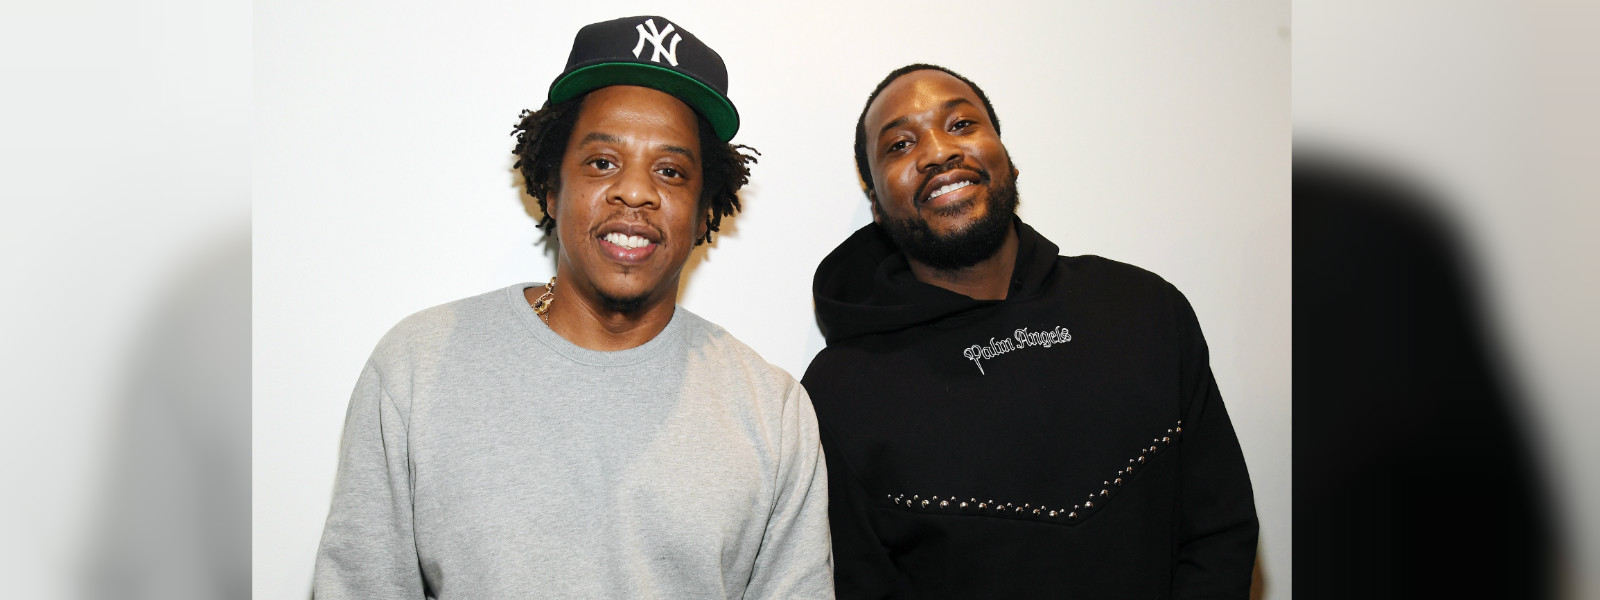 Jay Z,Meek Mill extend support to criminal justice